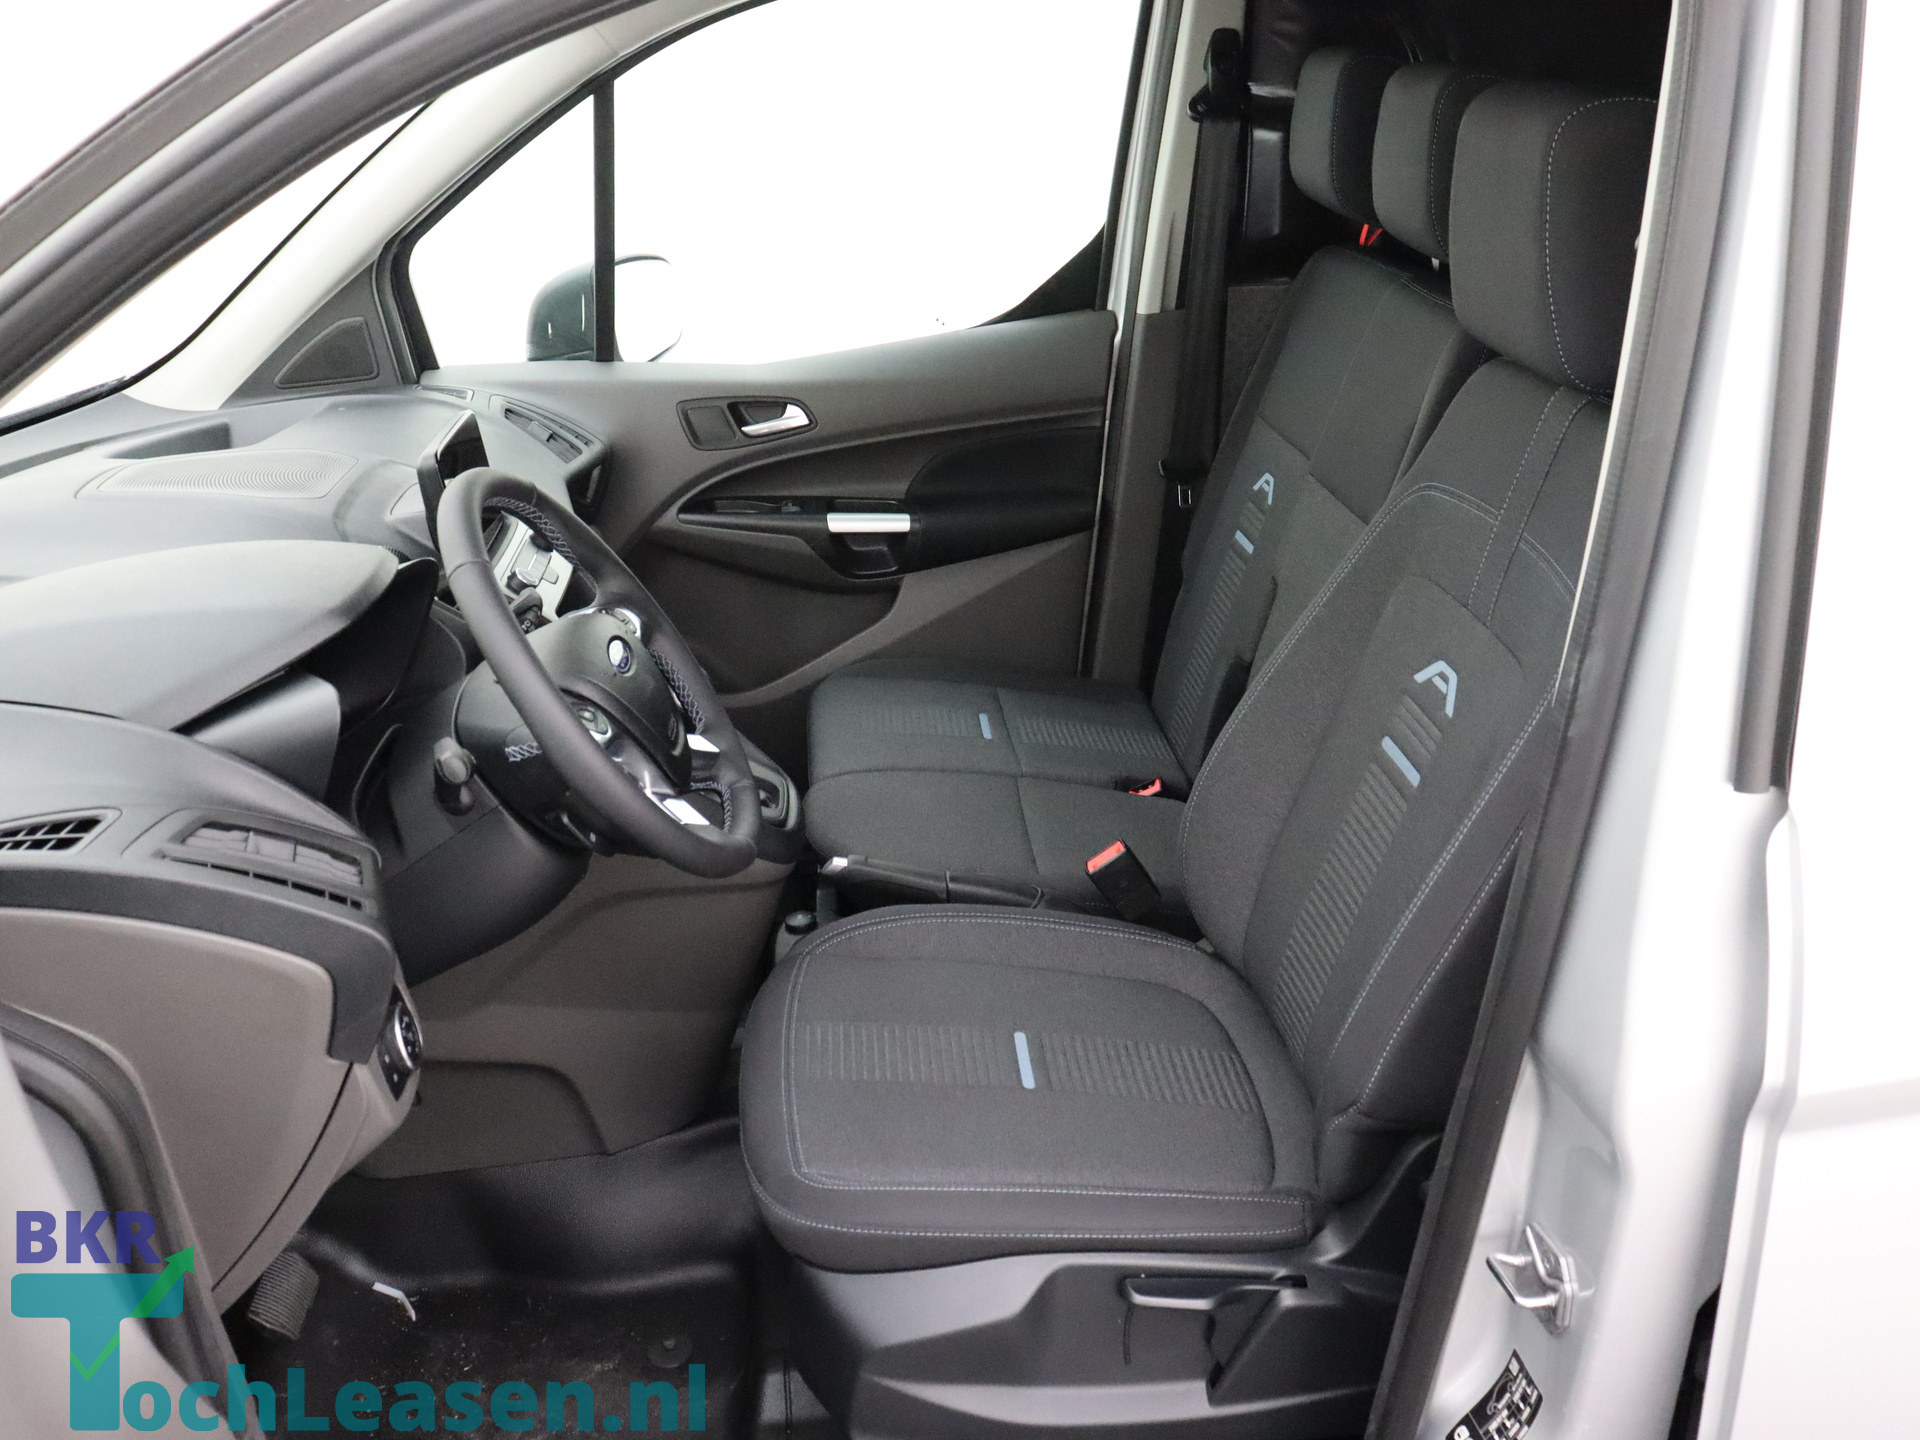 BKRTochleasen - Ford Transit Connect - Zilver 14